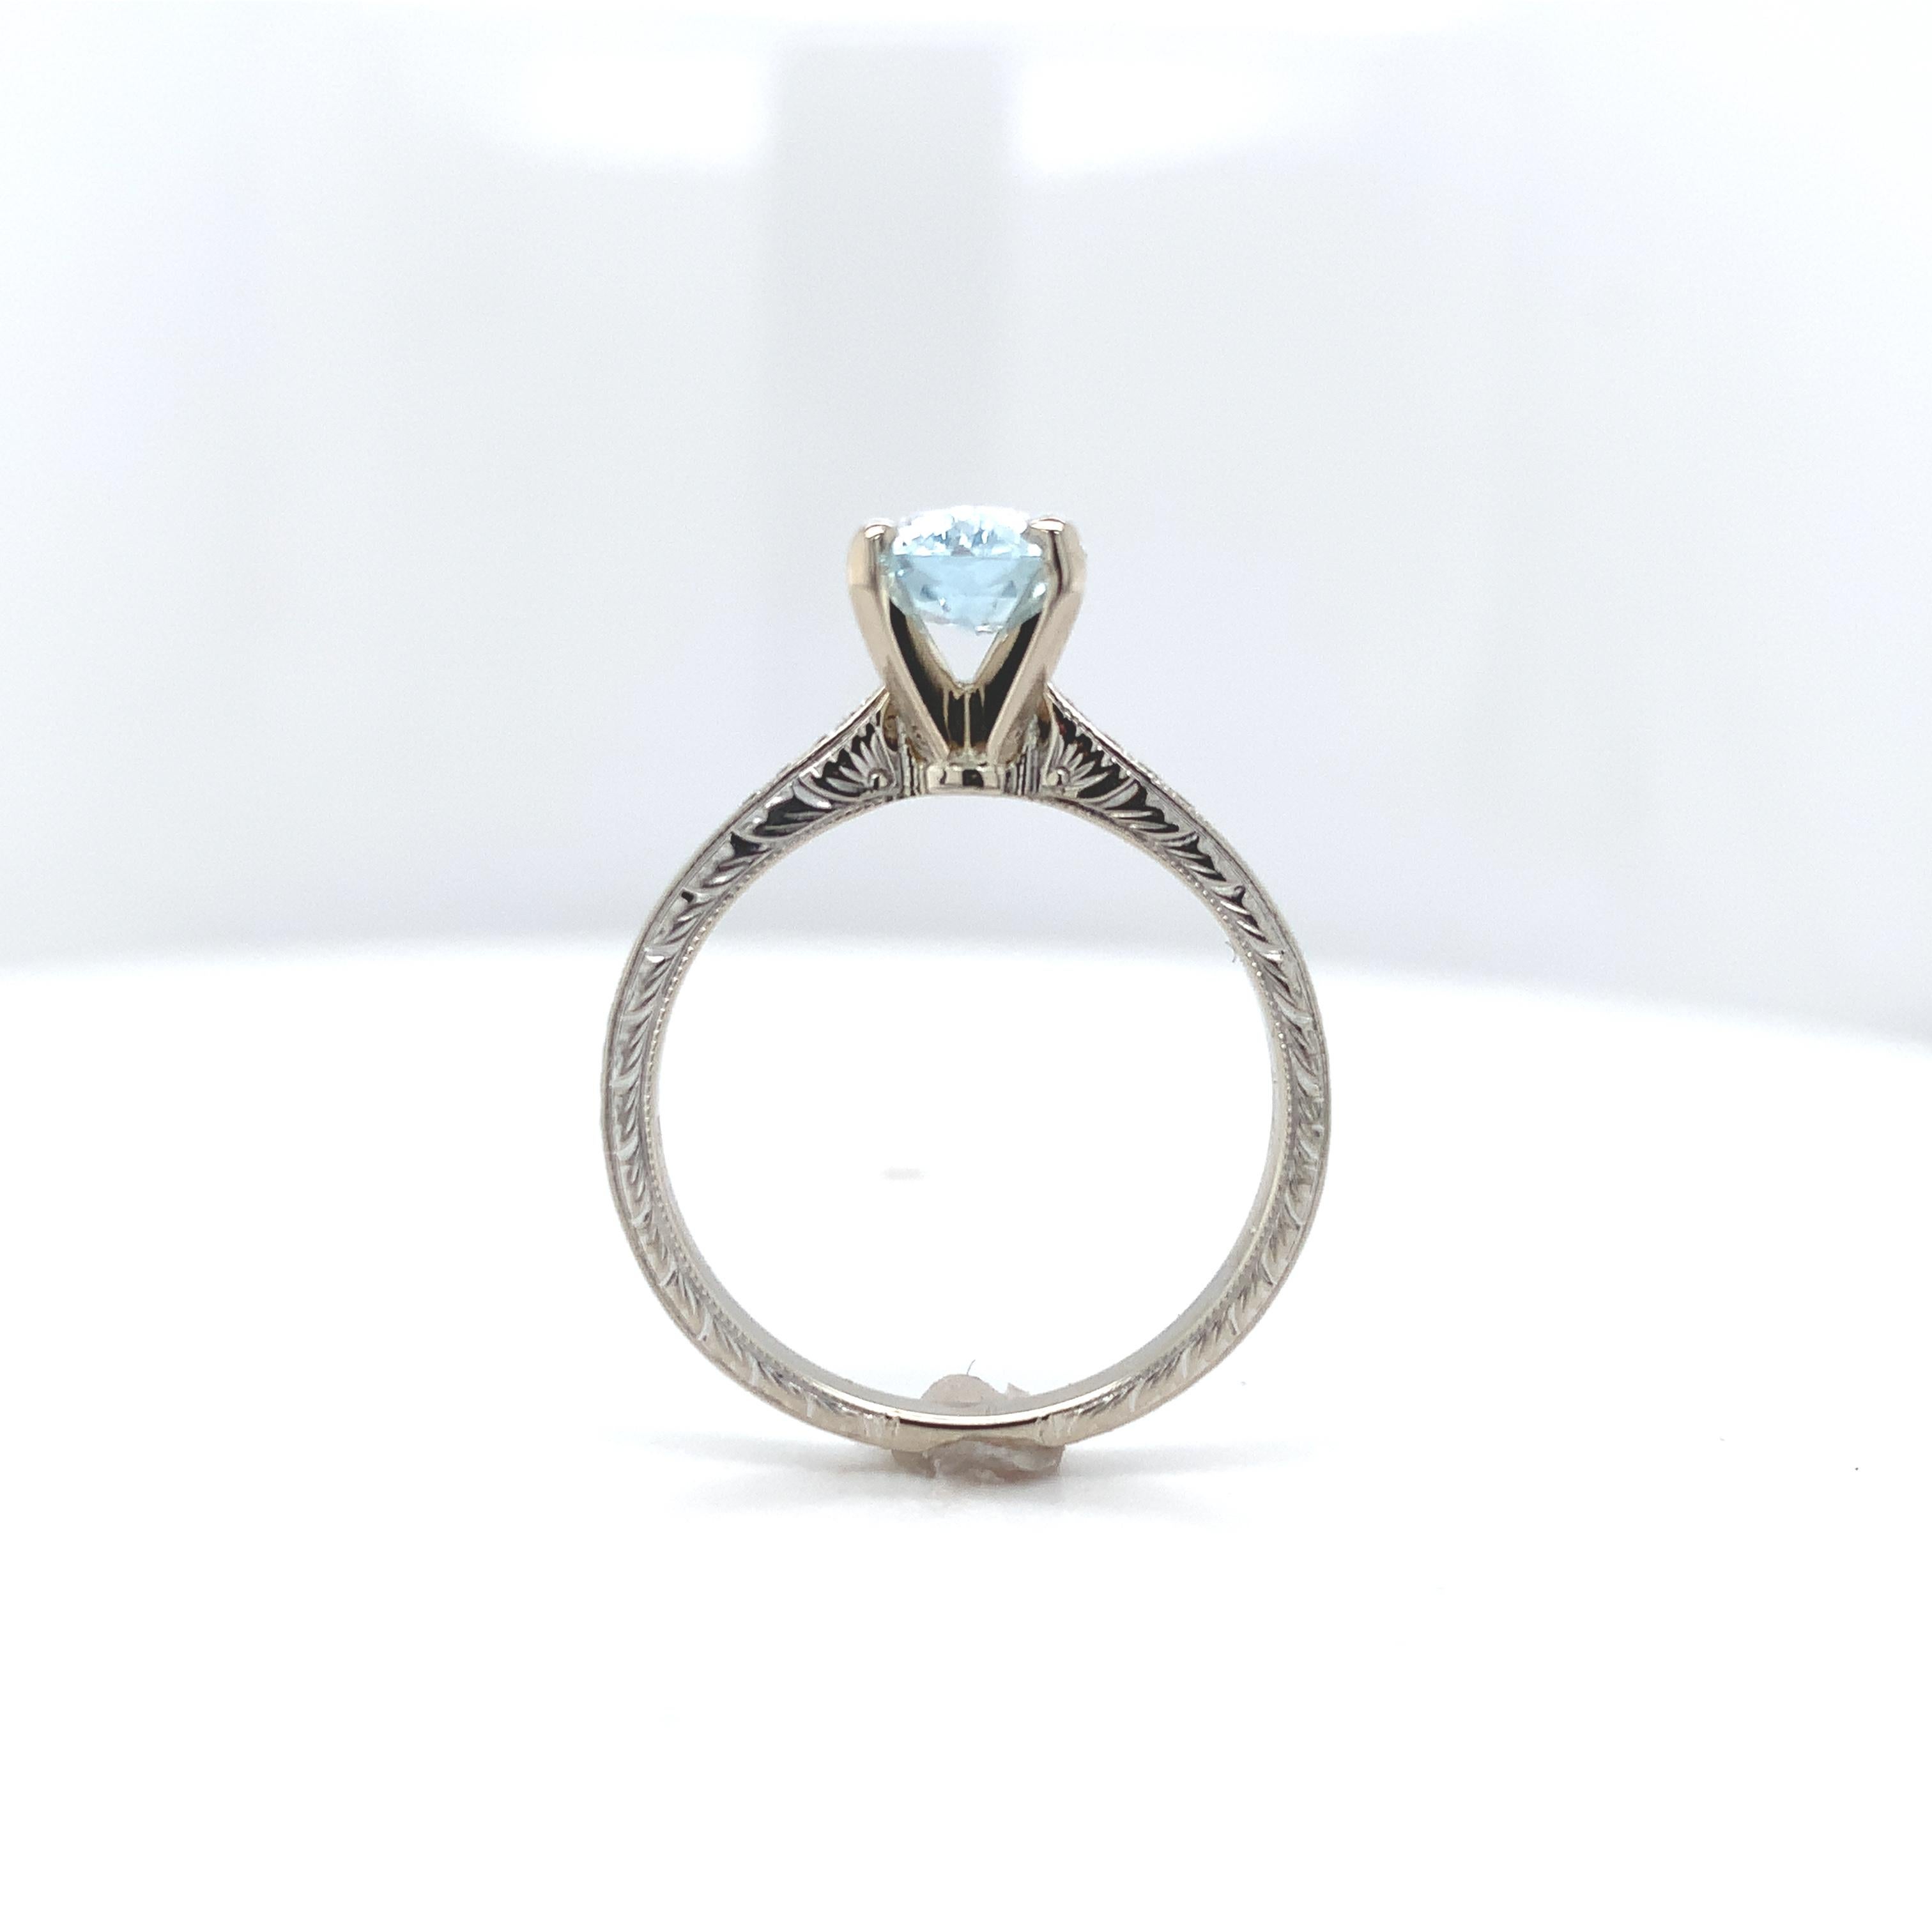 14K white gold aquamarine and diamond ring featuring a specialty cut aquamarine weighing 1.18 carats. The aquamarine measures about 9mm x 6.5mm. It is an elongated hexagon with light blue color. The aquamarine is set in a high solitaire head in a